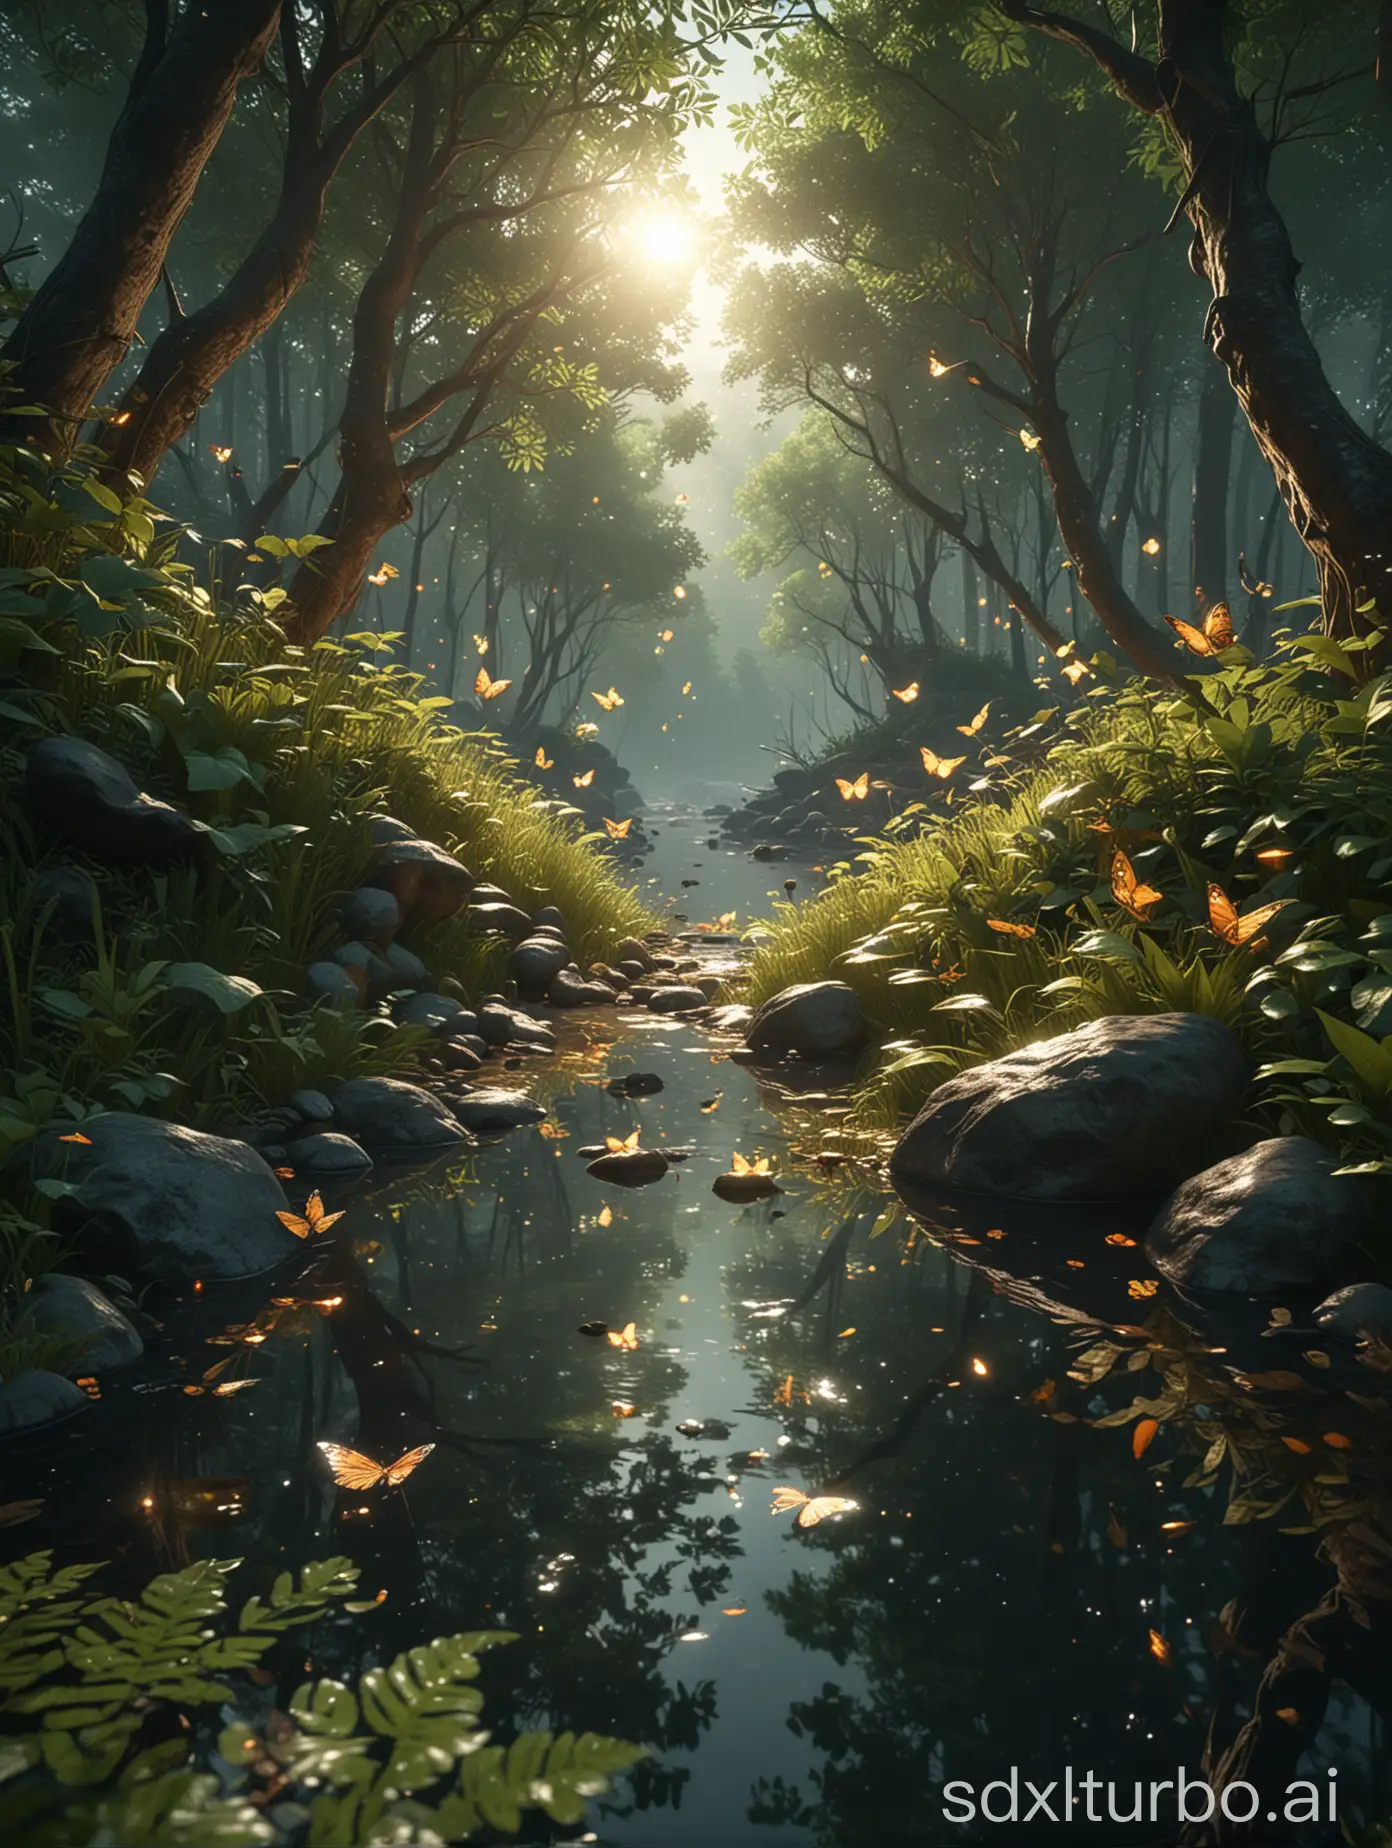 A masterpiece, the best quality, stunning reflections, the best reflections ever. (very detailed CG unity 8k wallpapers), (best quality), (best illustrations), (best shadows), forest theme with natural elements. Tall trees, quiet streams, small glowing mushrooms surrounded by delicate leaves and branches, with fireflies and glowing particle effects,, (natural elements), (jungle theme), (leaves), (twigs), (fireflies), butterflies, (delicate leaves), (glow), (particle effects). Isometric 3D, Octane Rendering, Ray Traced, Super Detailed